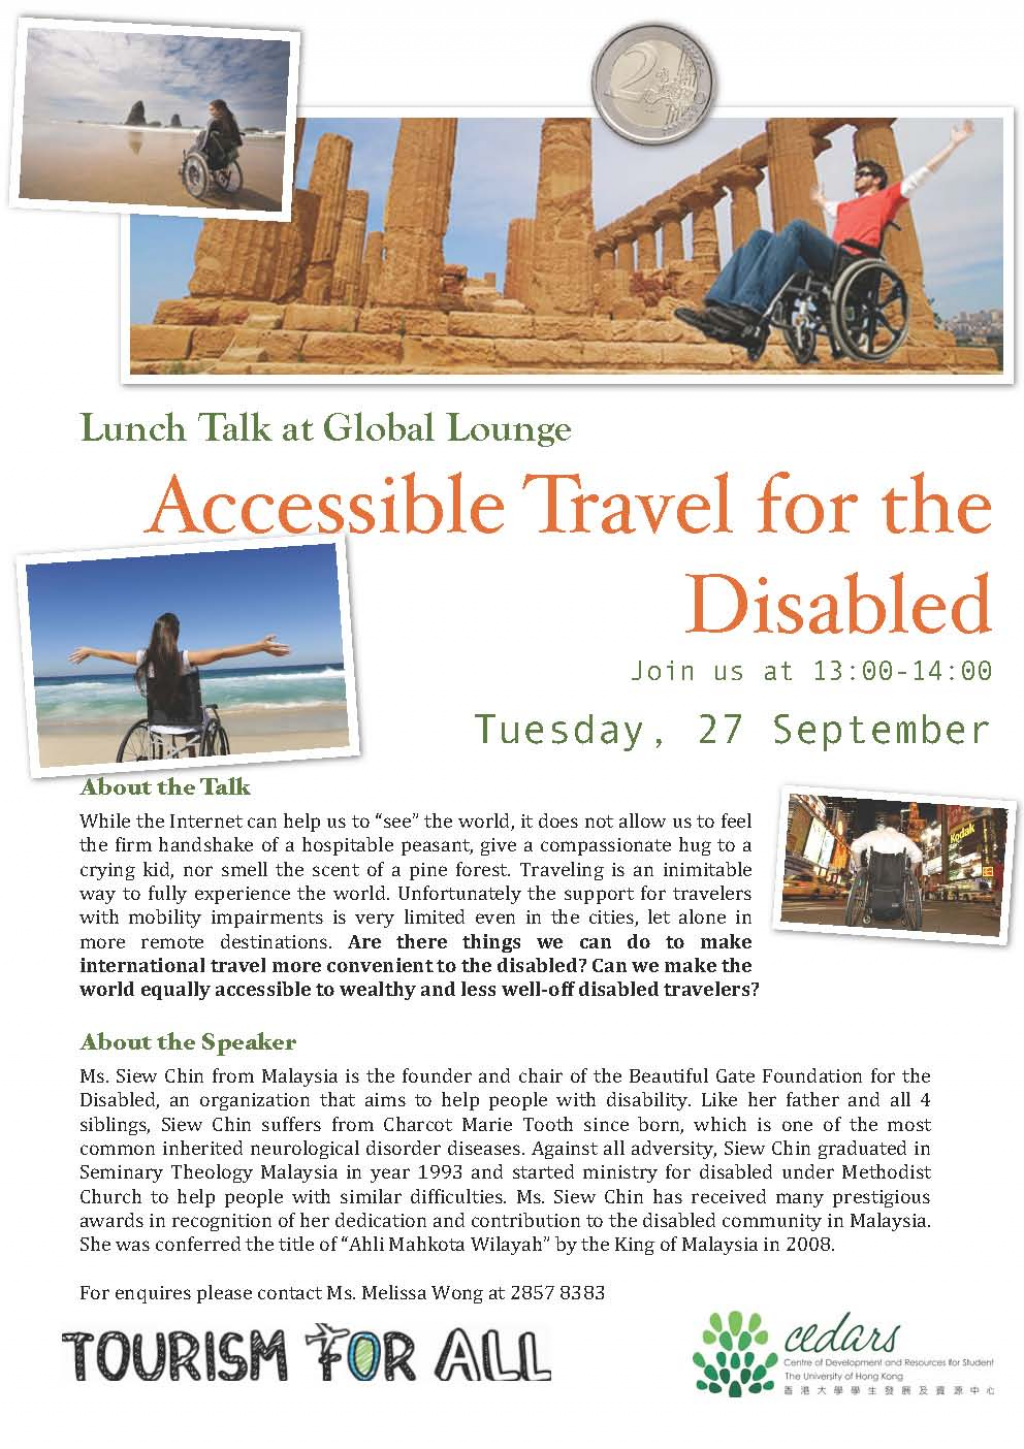 Lunch Talk on Accessible Travel for the Disabled